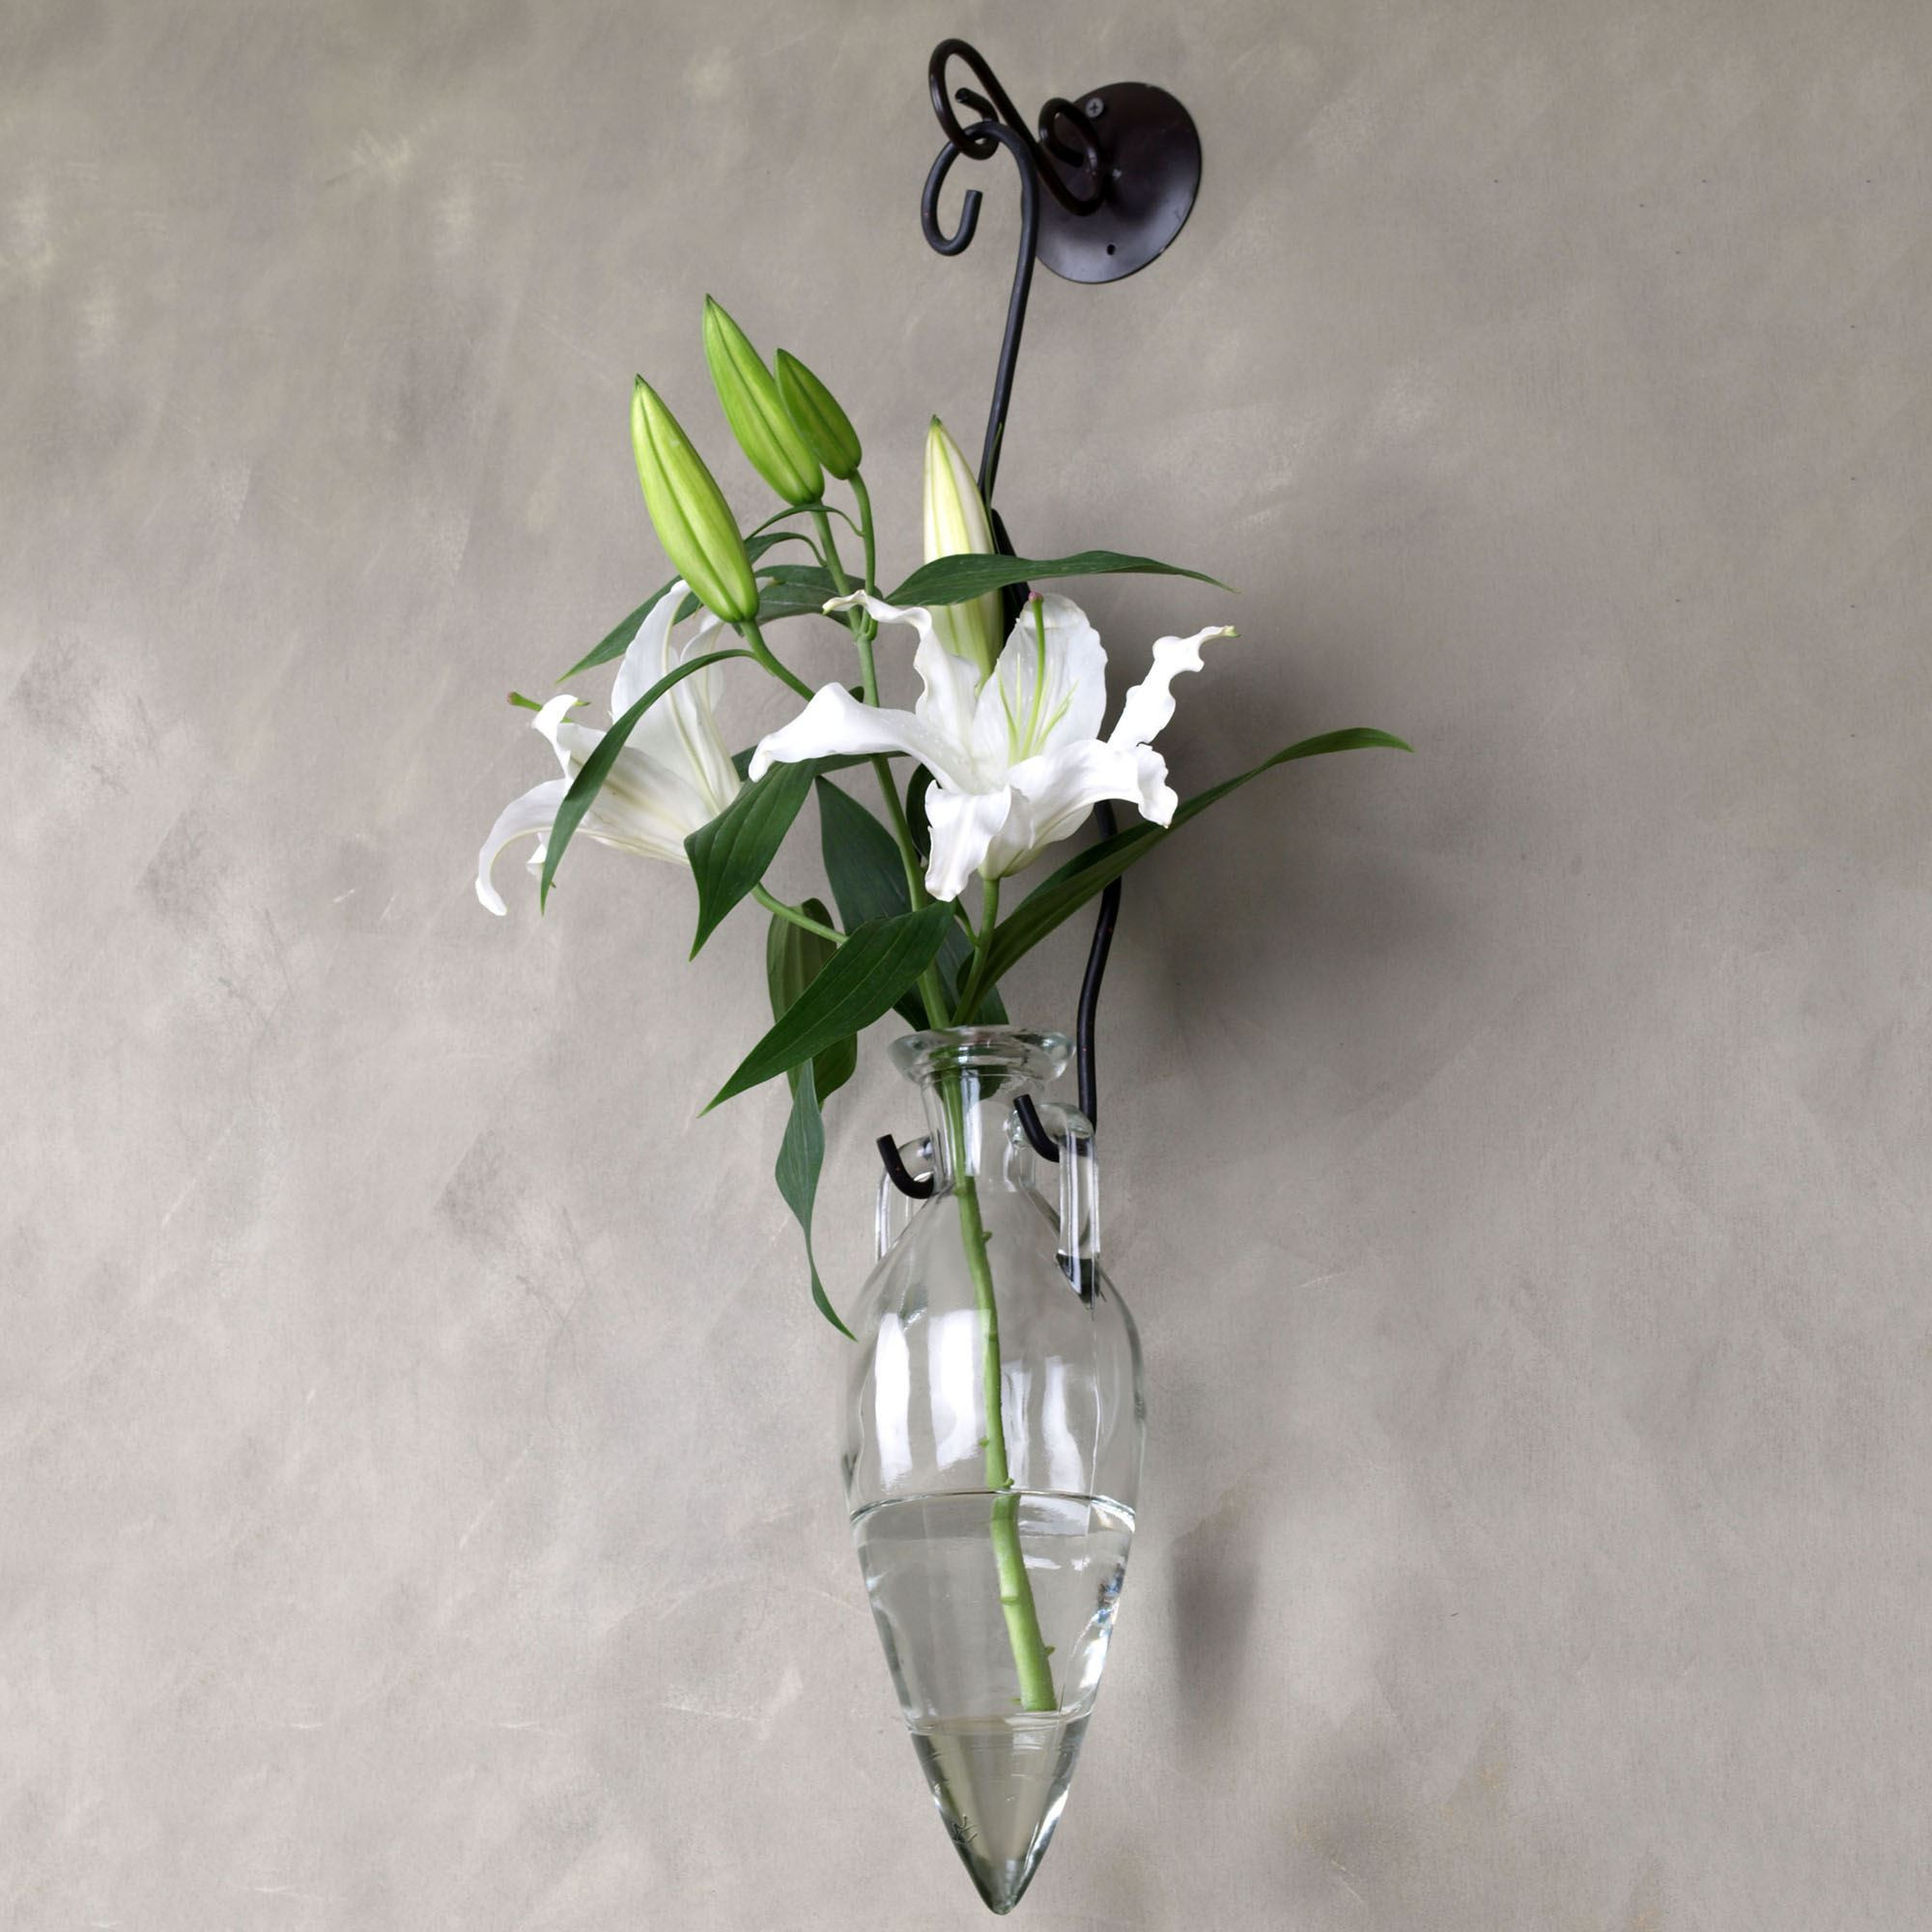 19 Recommended Rustic Metal Flower Vase 2024 free download rustic metal flower vase of tin flower vase gallery ceiling light kitchen fresh wall wire cover for tin flower vase collection h vases wall hanging flower vase newspaper i 0d scheme wall sch